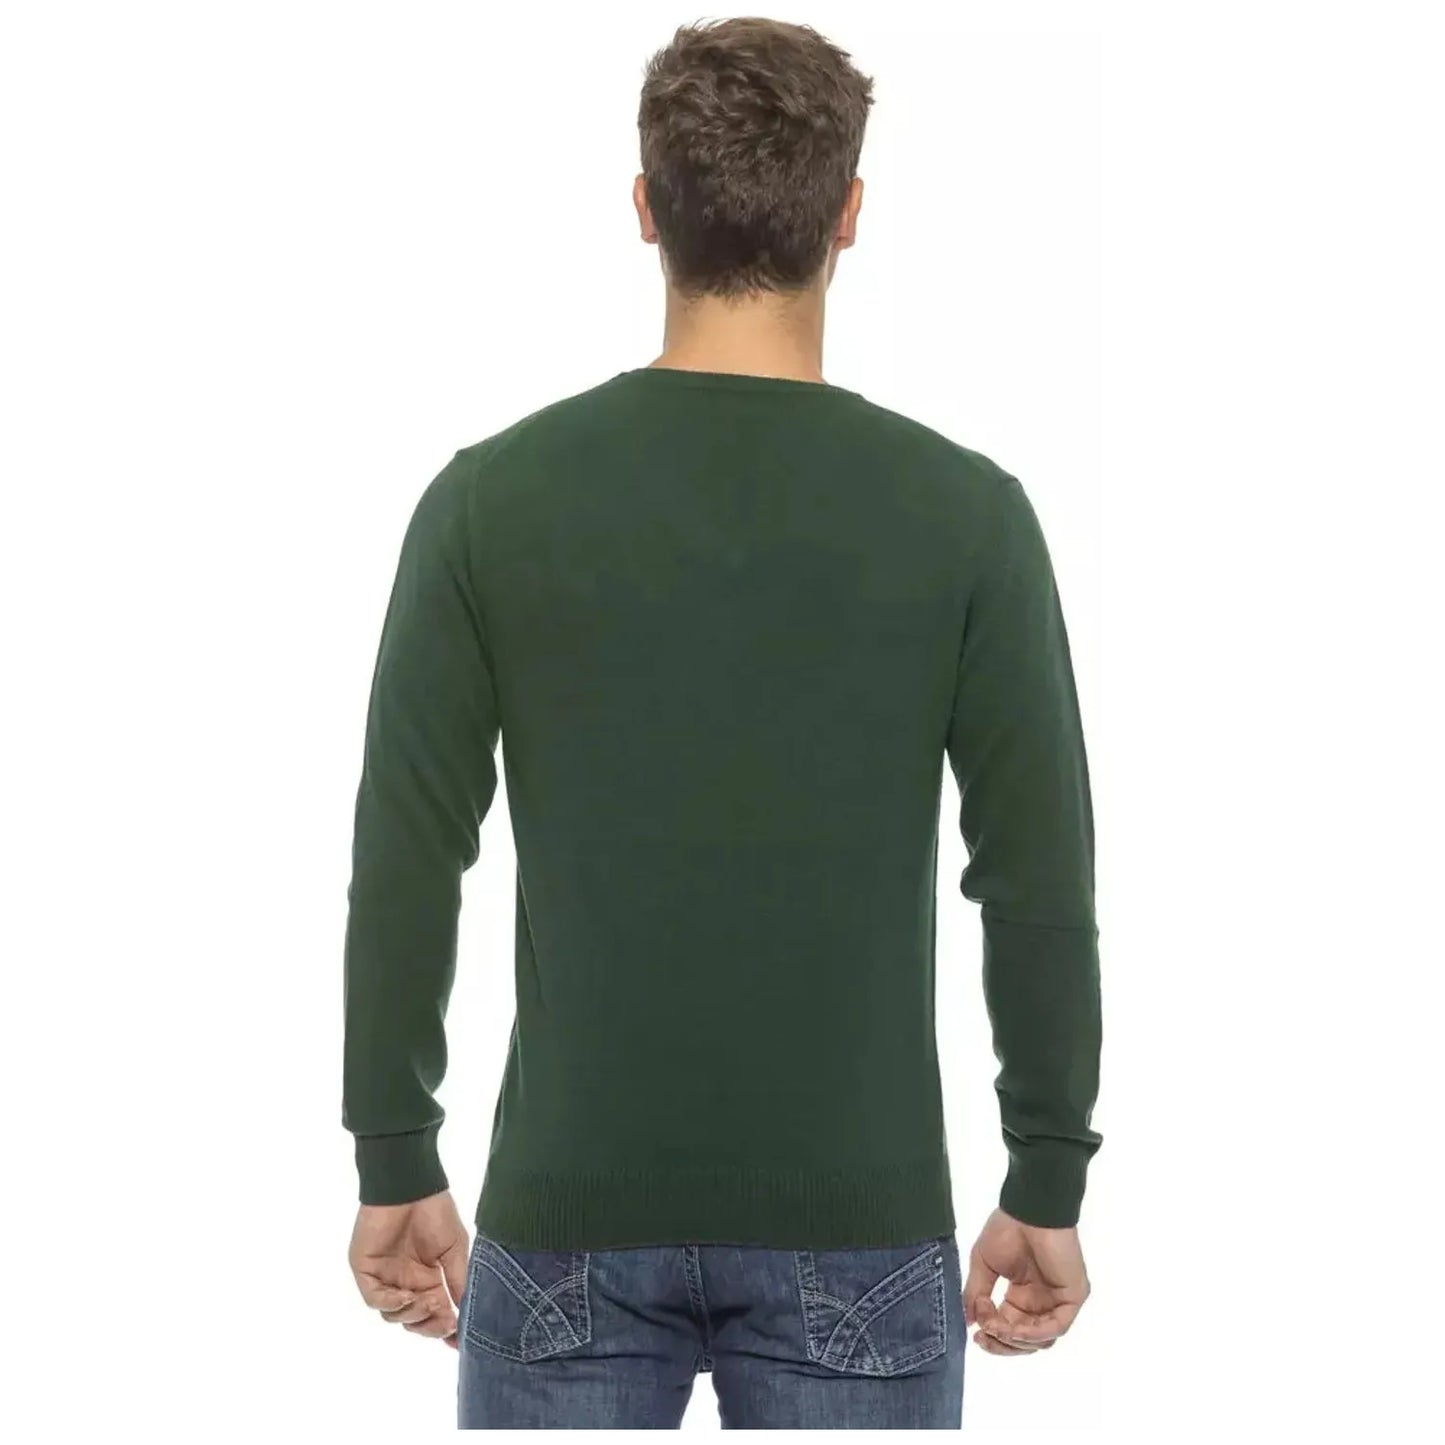 Conte of Florence Elegant Green V-Neck Men's Sweater green-sweater stock_product_image_19451_1176861906-17-6f2c6a7d-969.webp